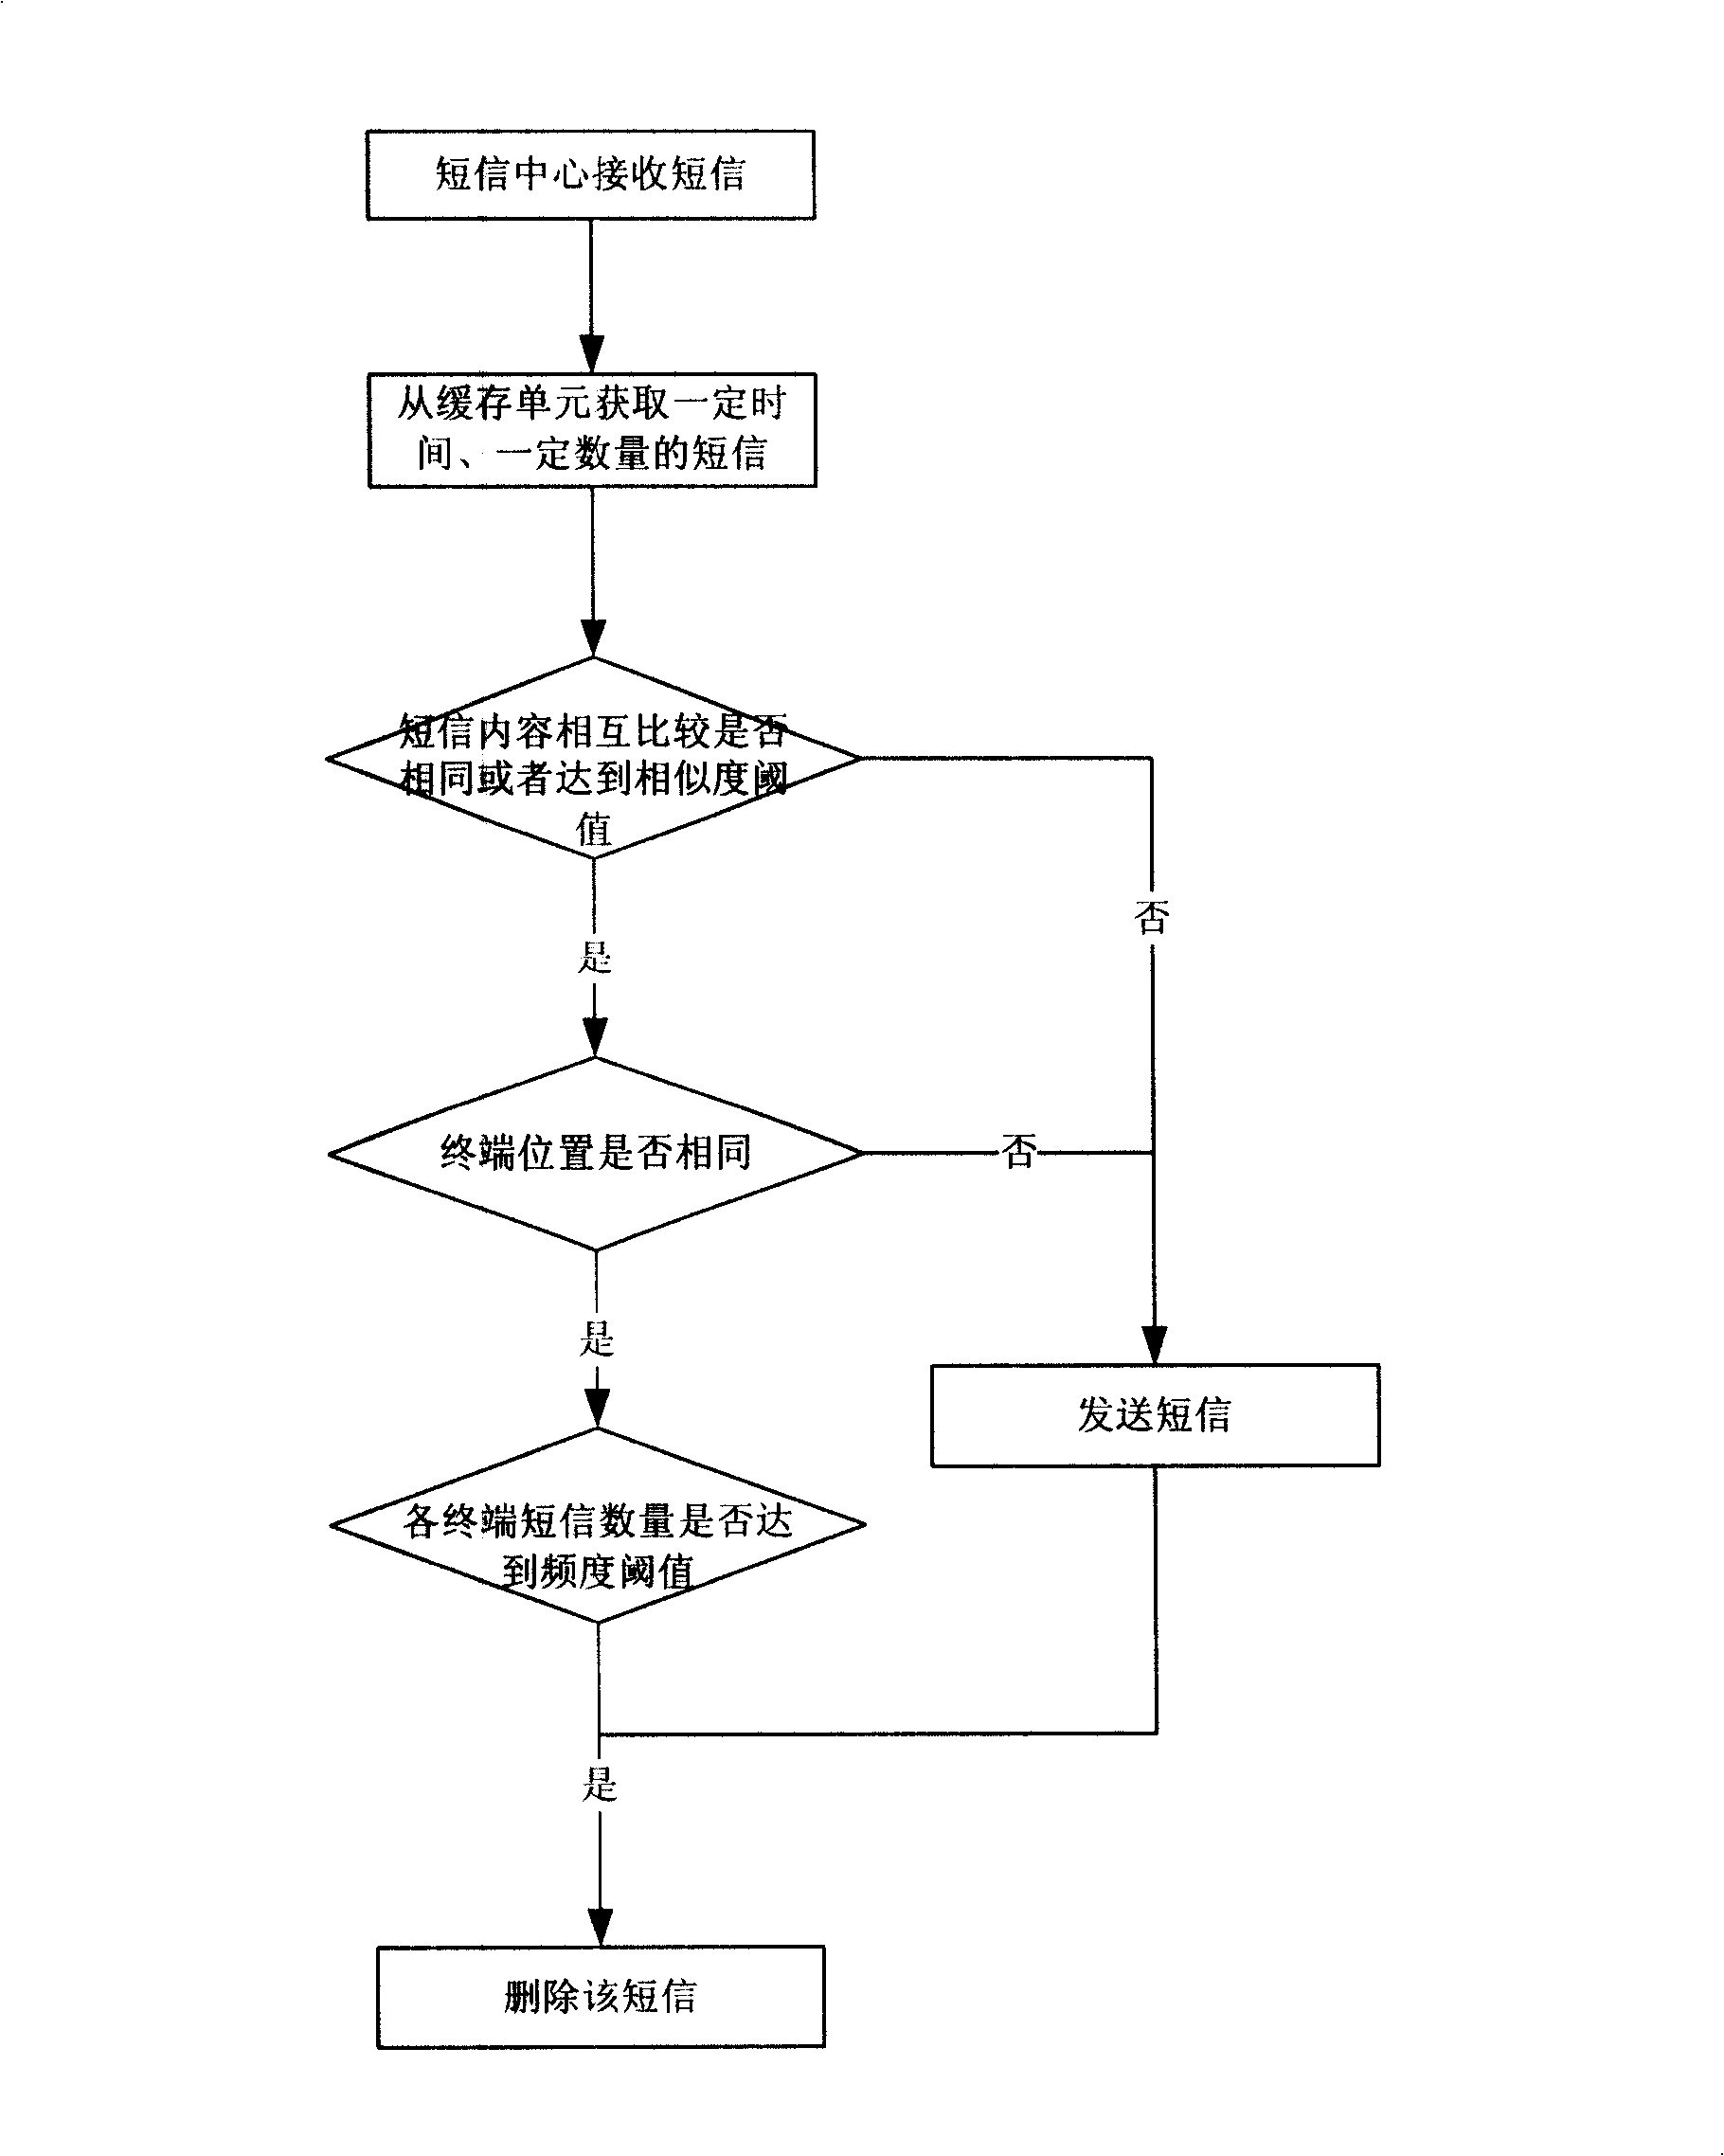 Method and equipment for shielding rubbish short message